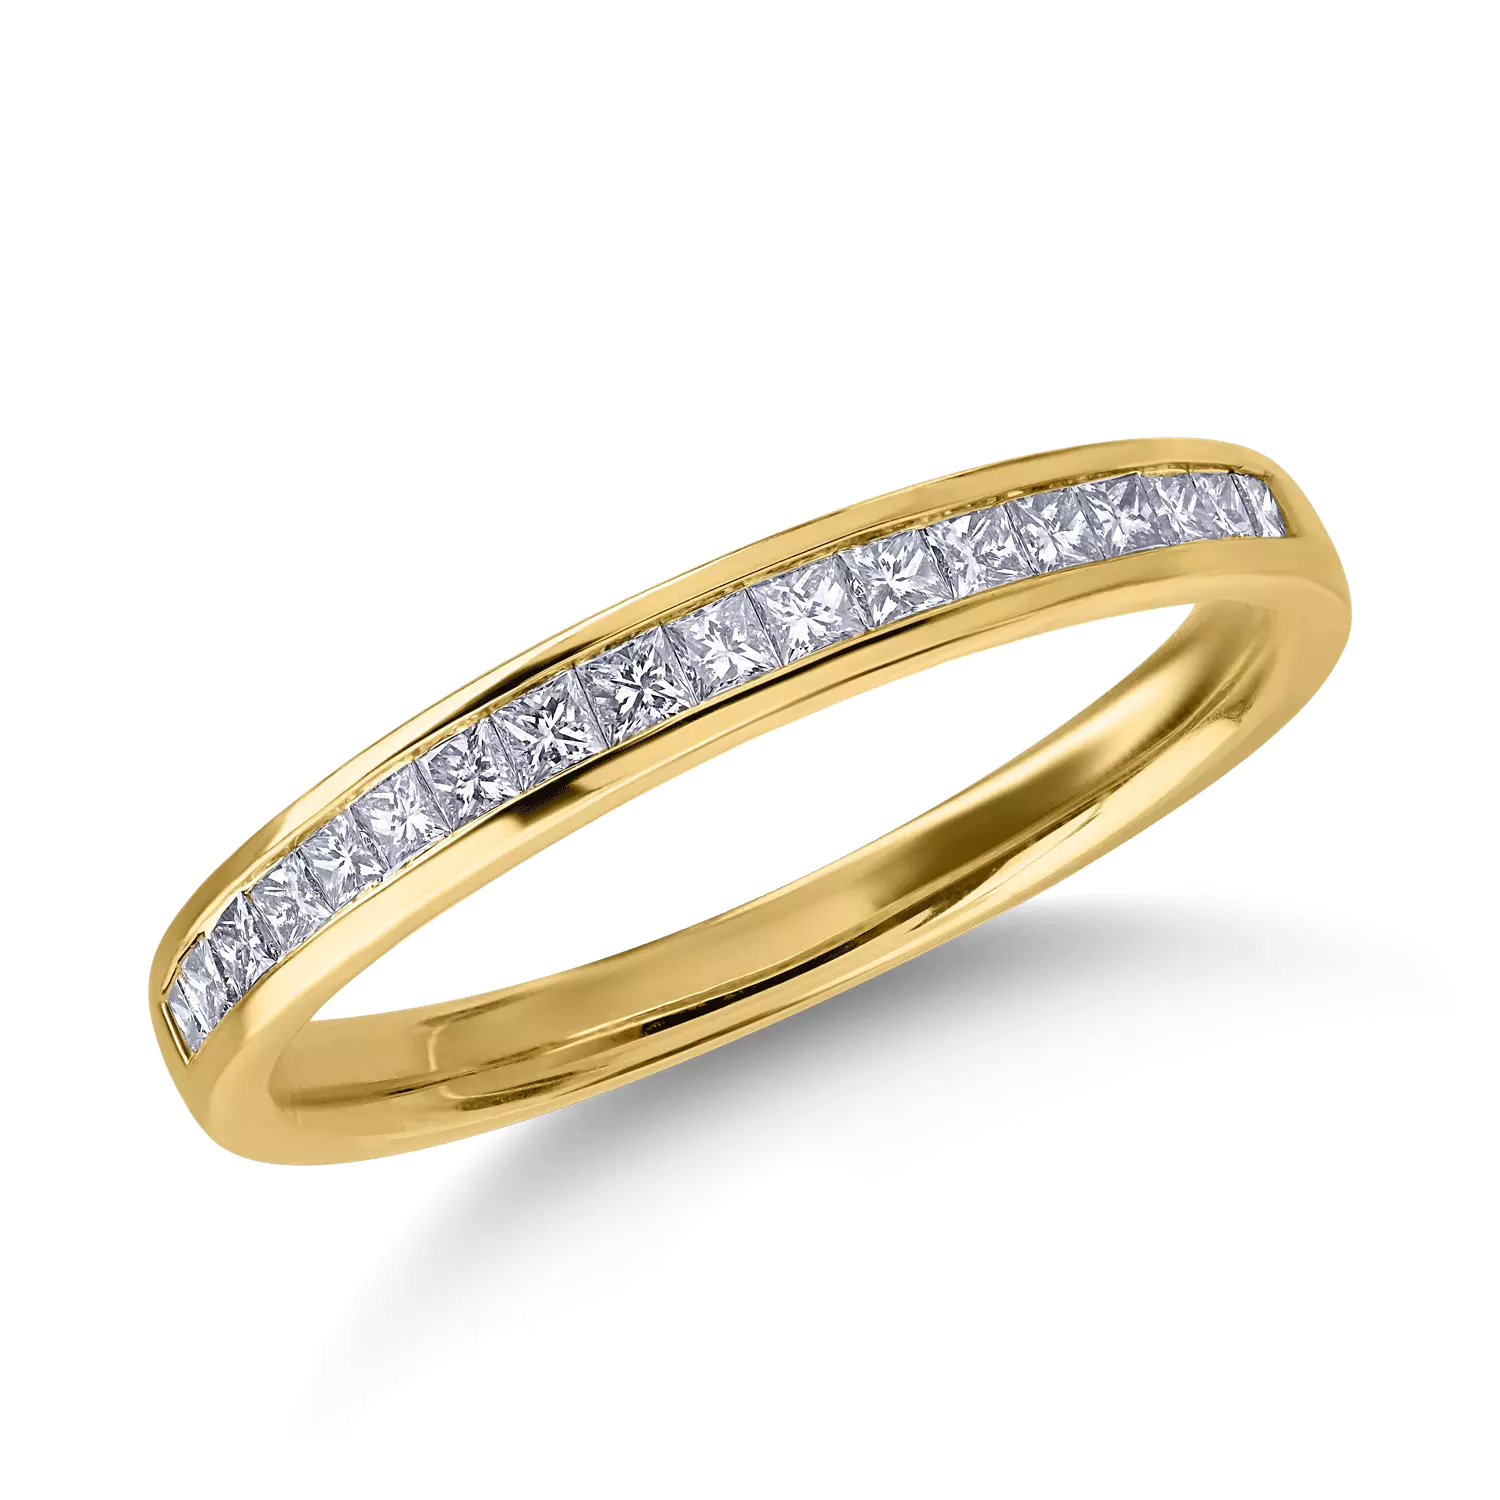 Half eternity ring in yellow gold with 0.35ct diamonds